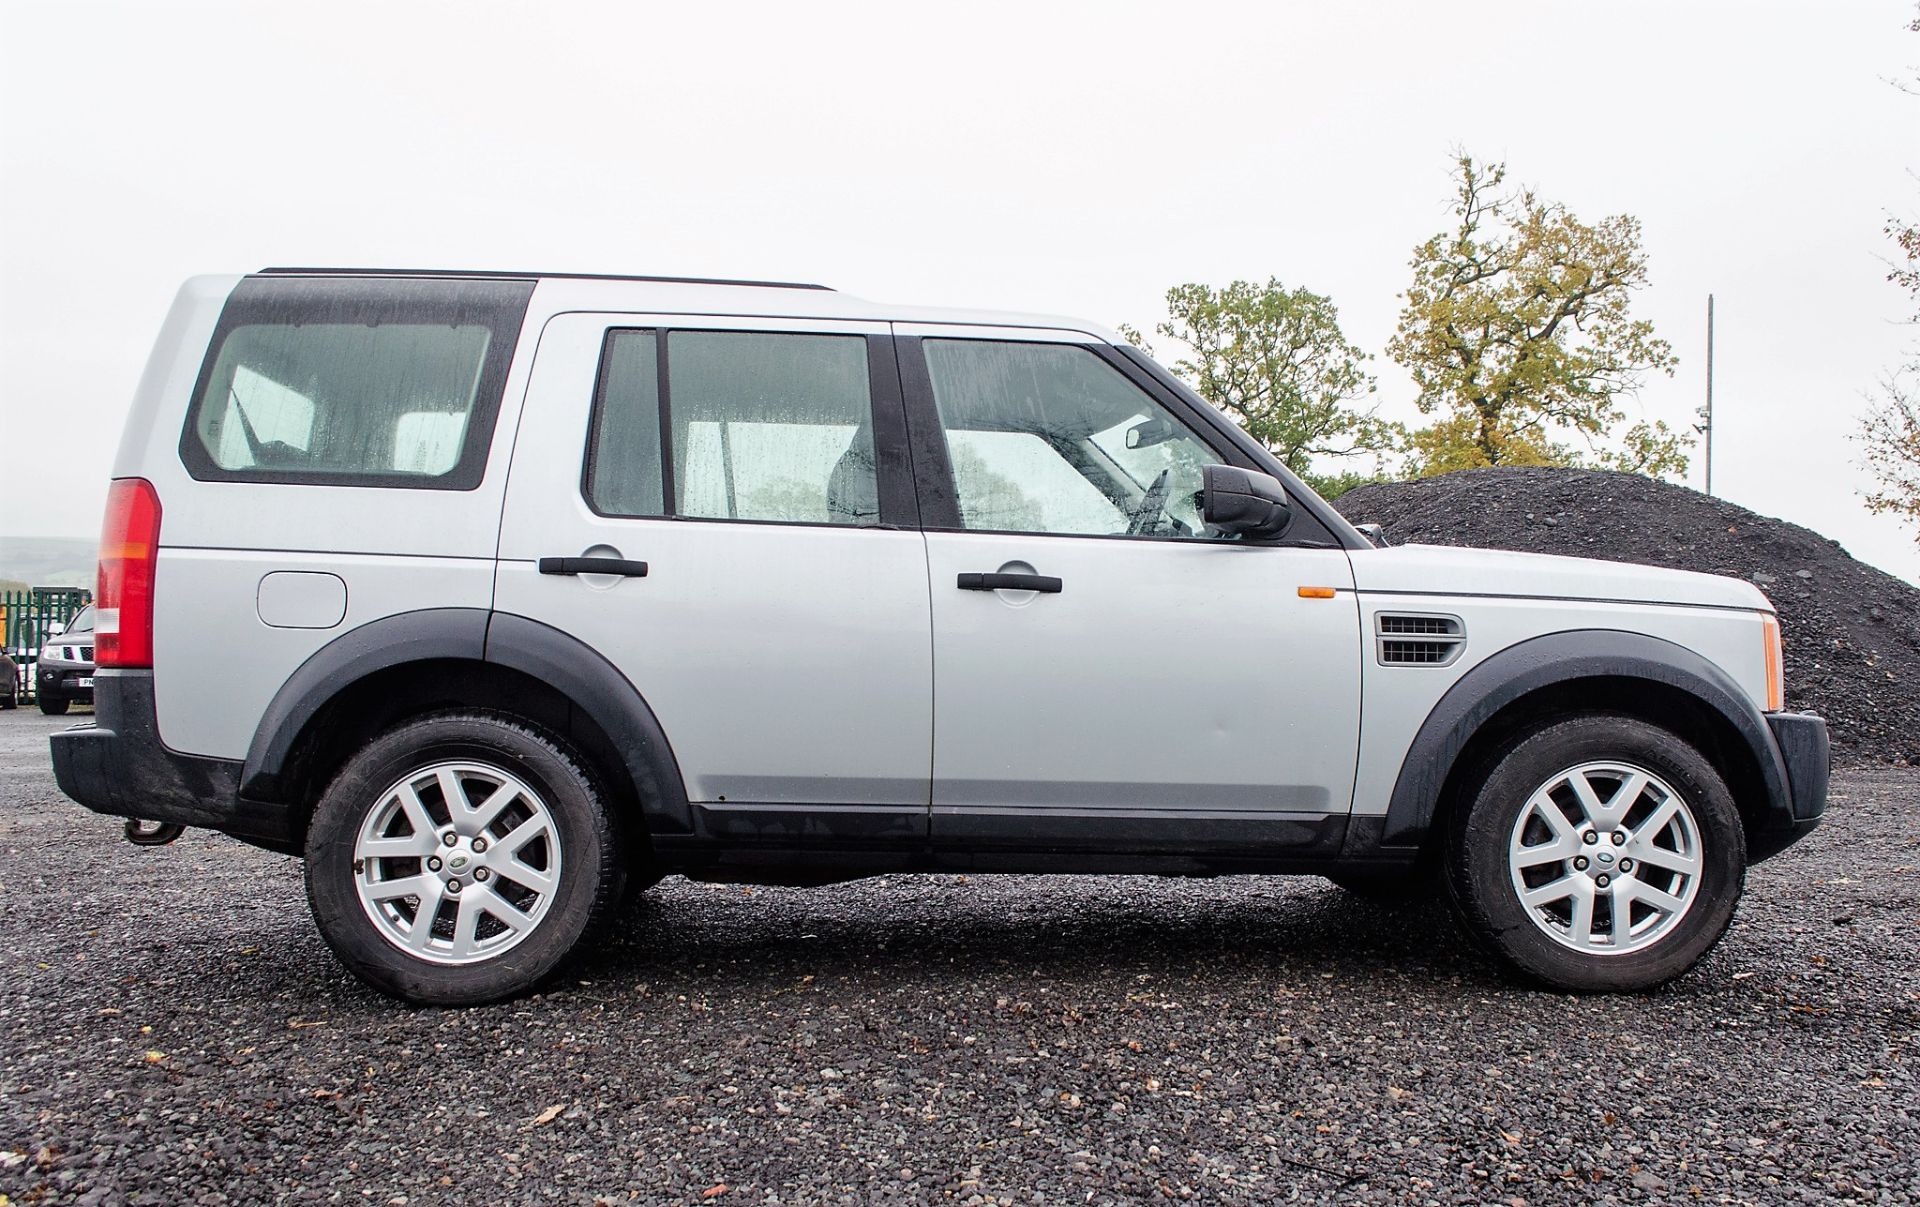 Land Rover Discovery 3 TDV6 XS 5 door 4wd estate car Registration Number: SK58 ZKC Date of - Image 8 of 31